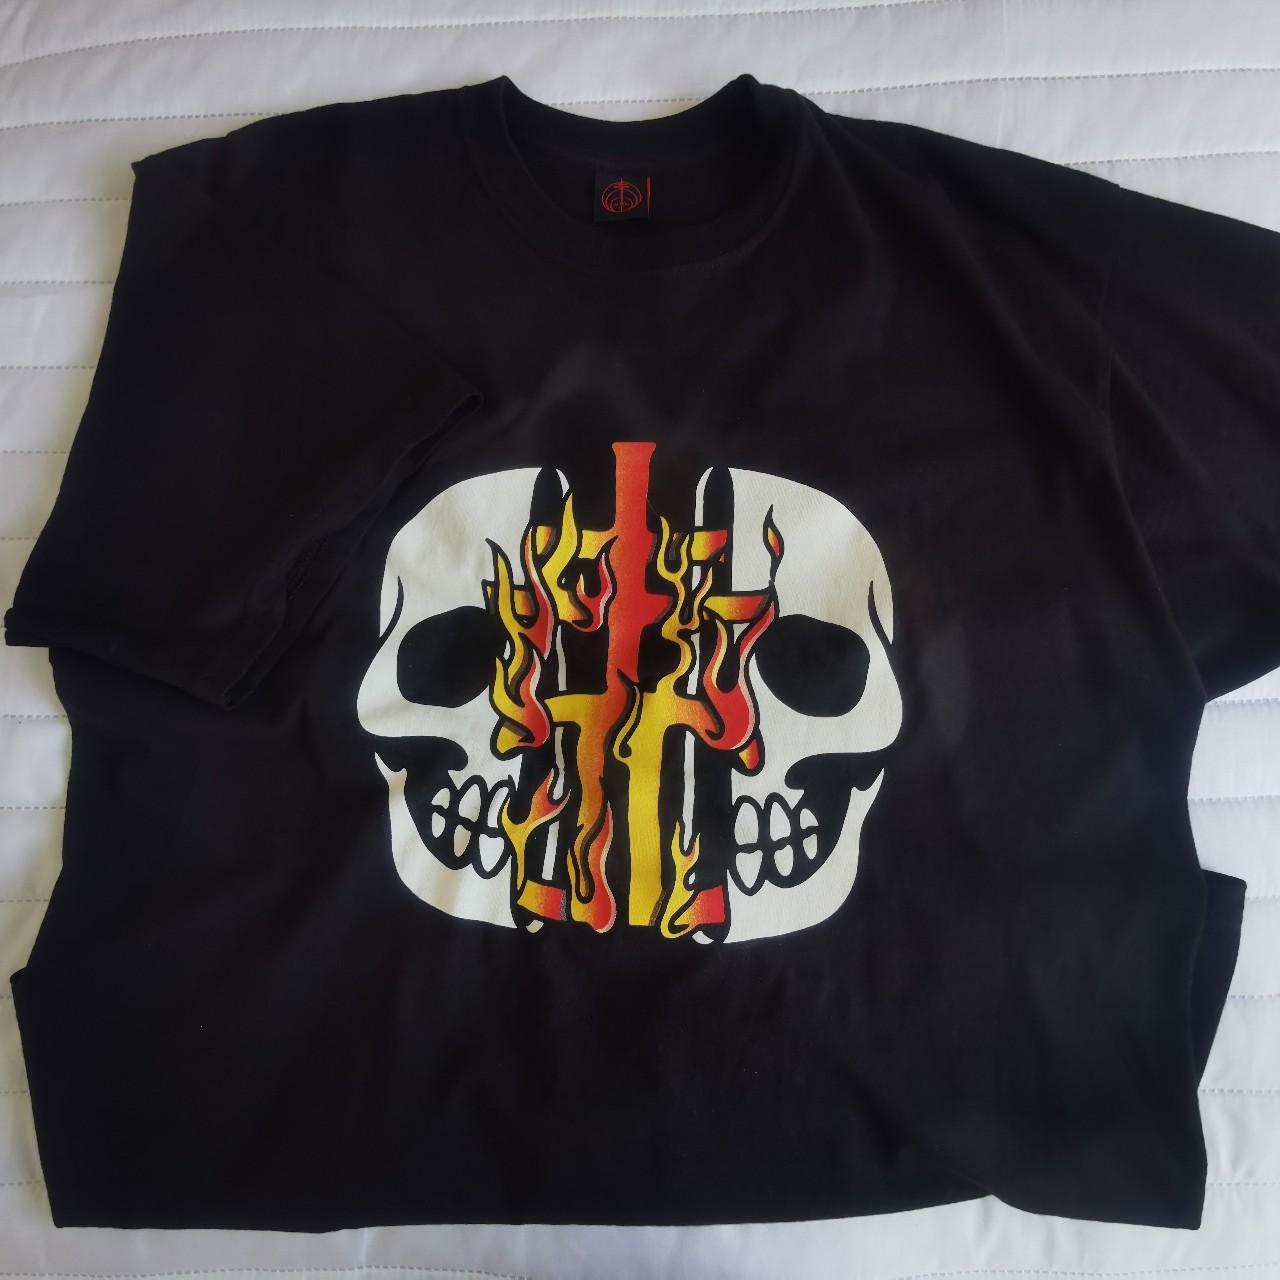 Dropdead t-shirt sigil, skull and flames. Not on... - Depop